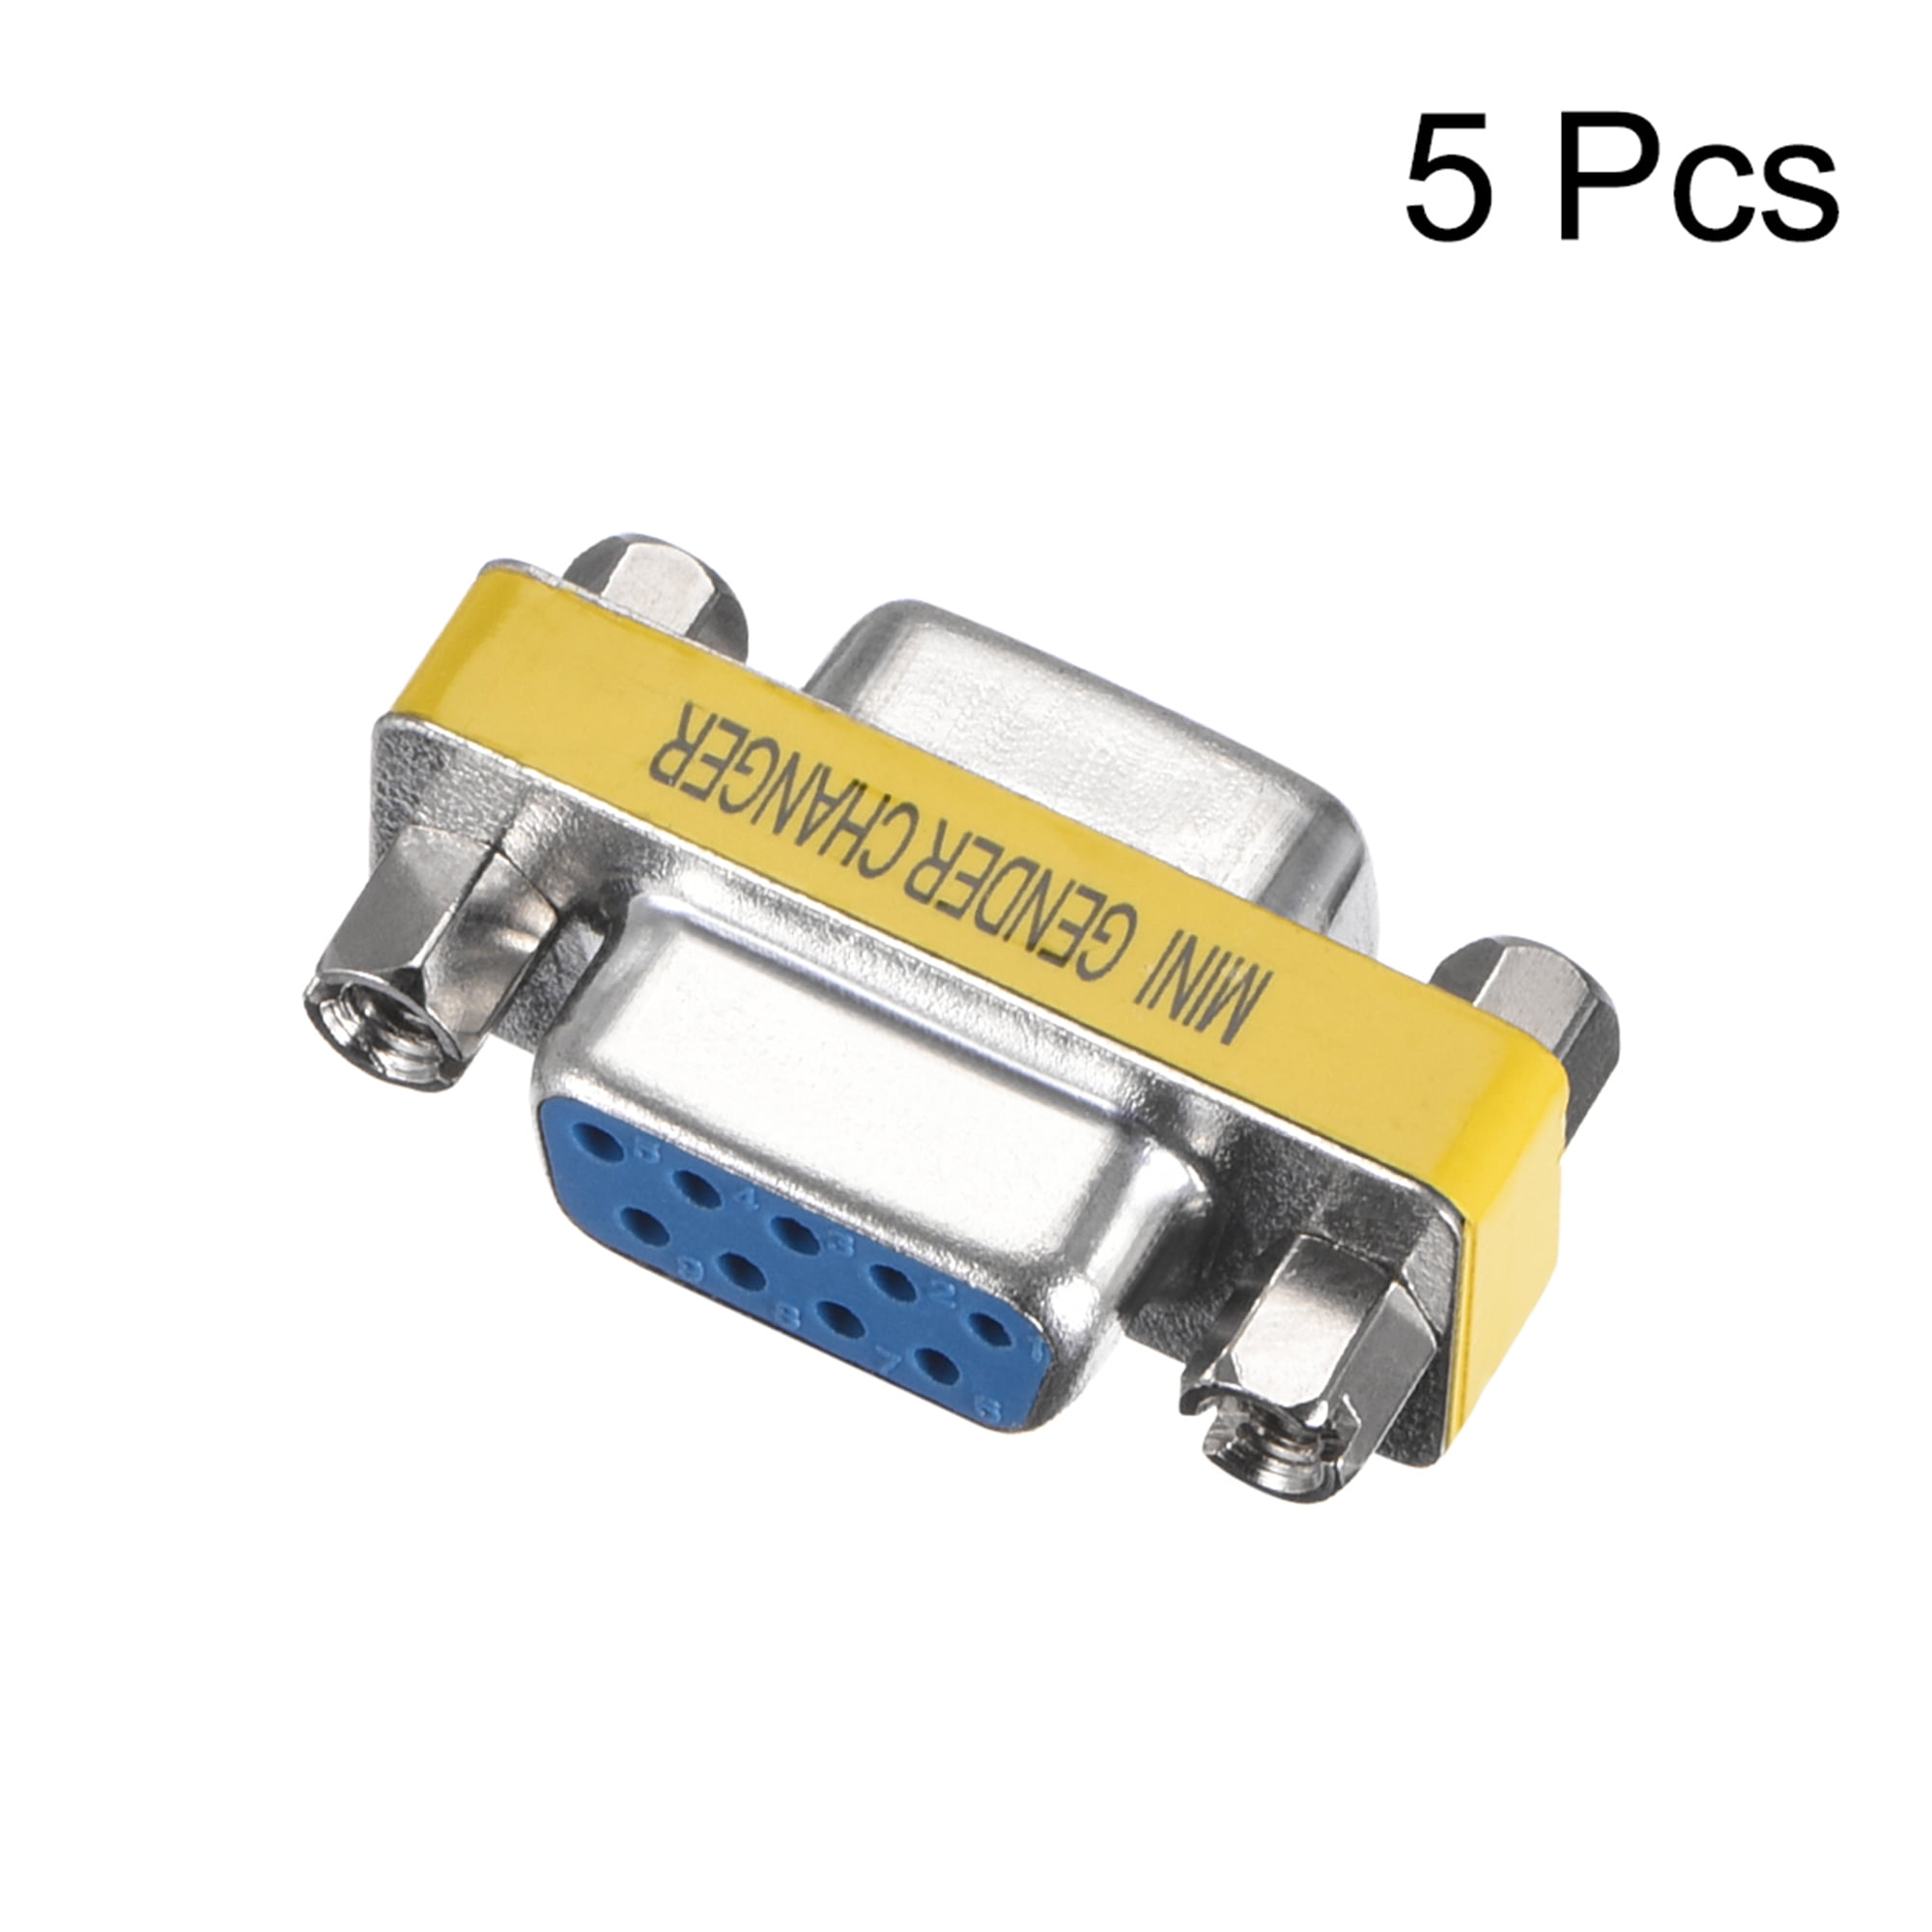 Fielect DB9 VGA Gender Changer 9 Pin Male to Female 2-Row Mini Gender Changer Coupler Adapter Connector for Serial Applications Blue Pack of 5 